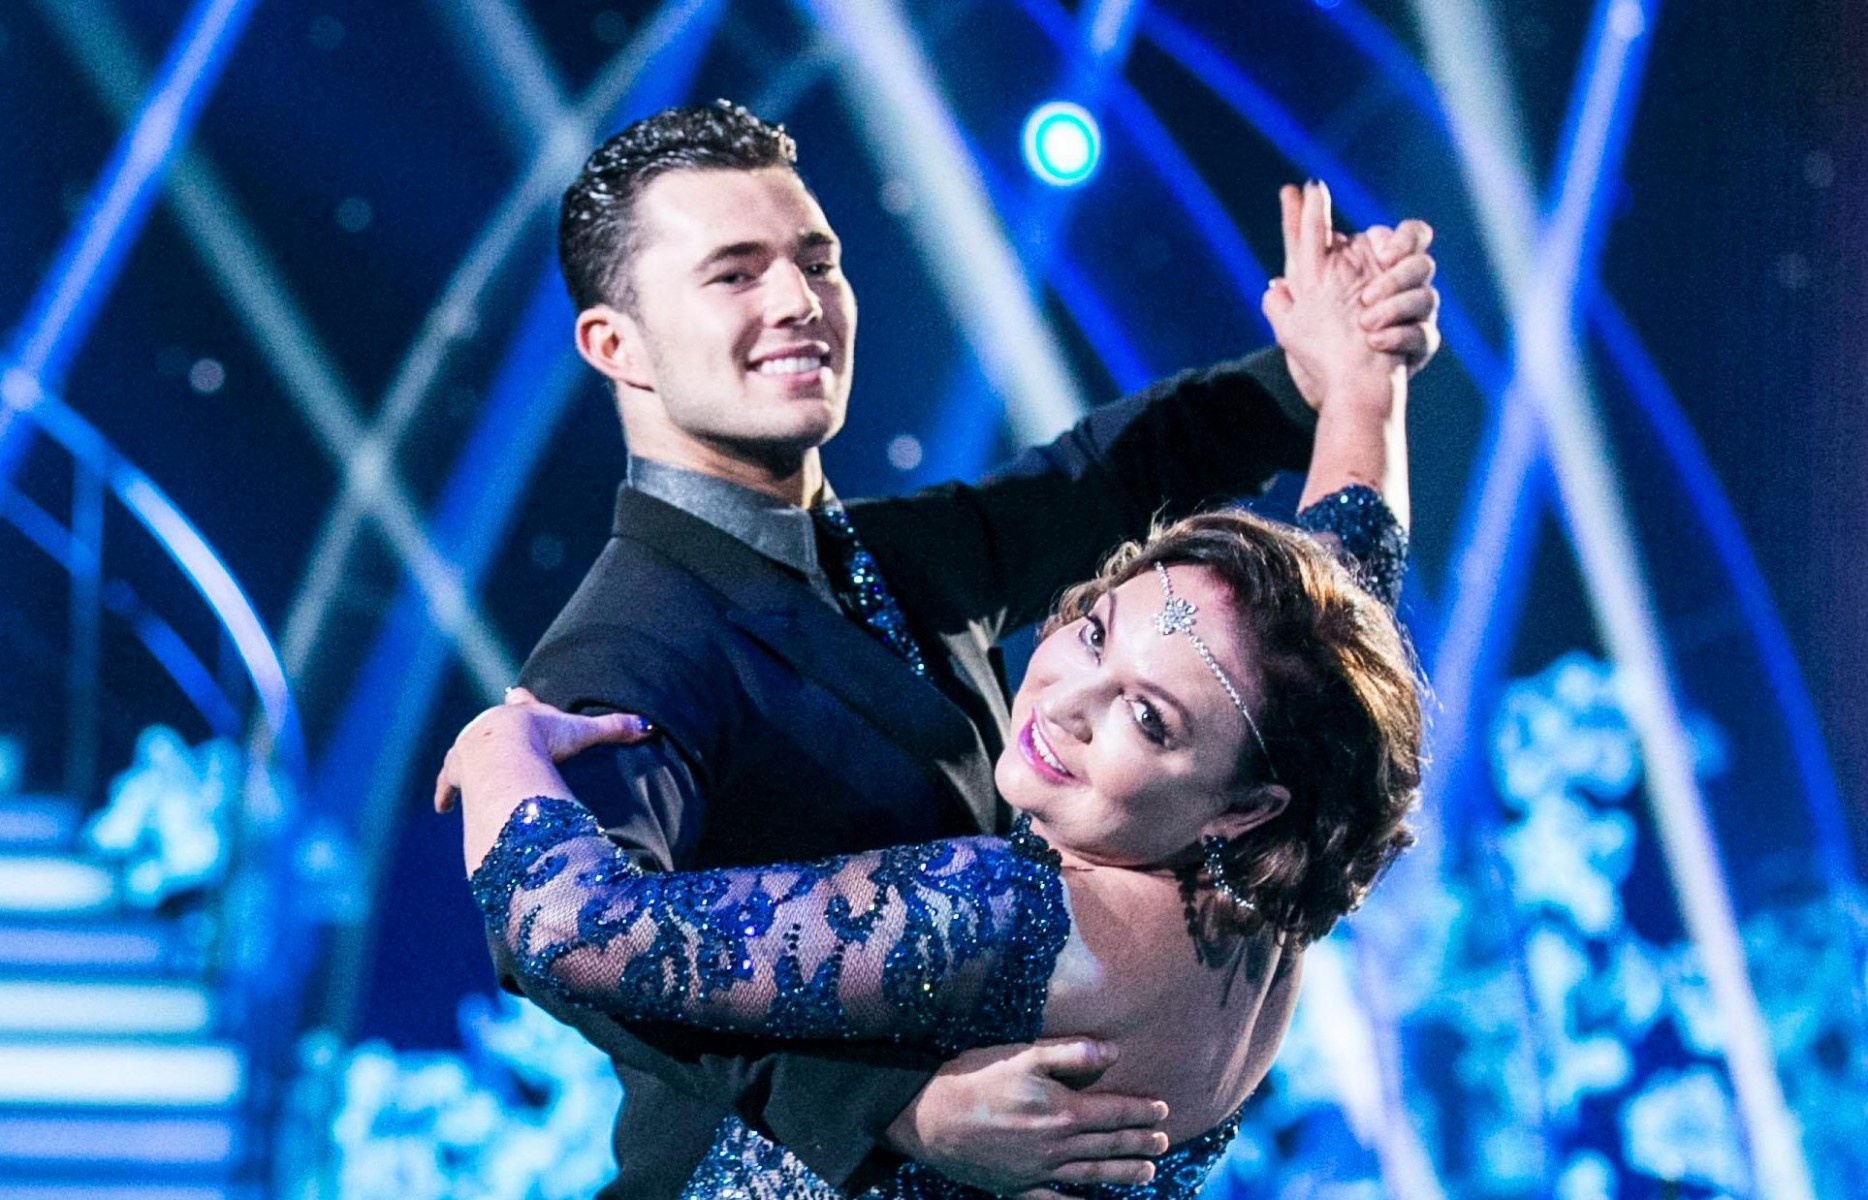 Curtis starred on Dancing With The Stars in Ireland